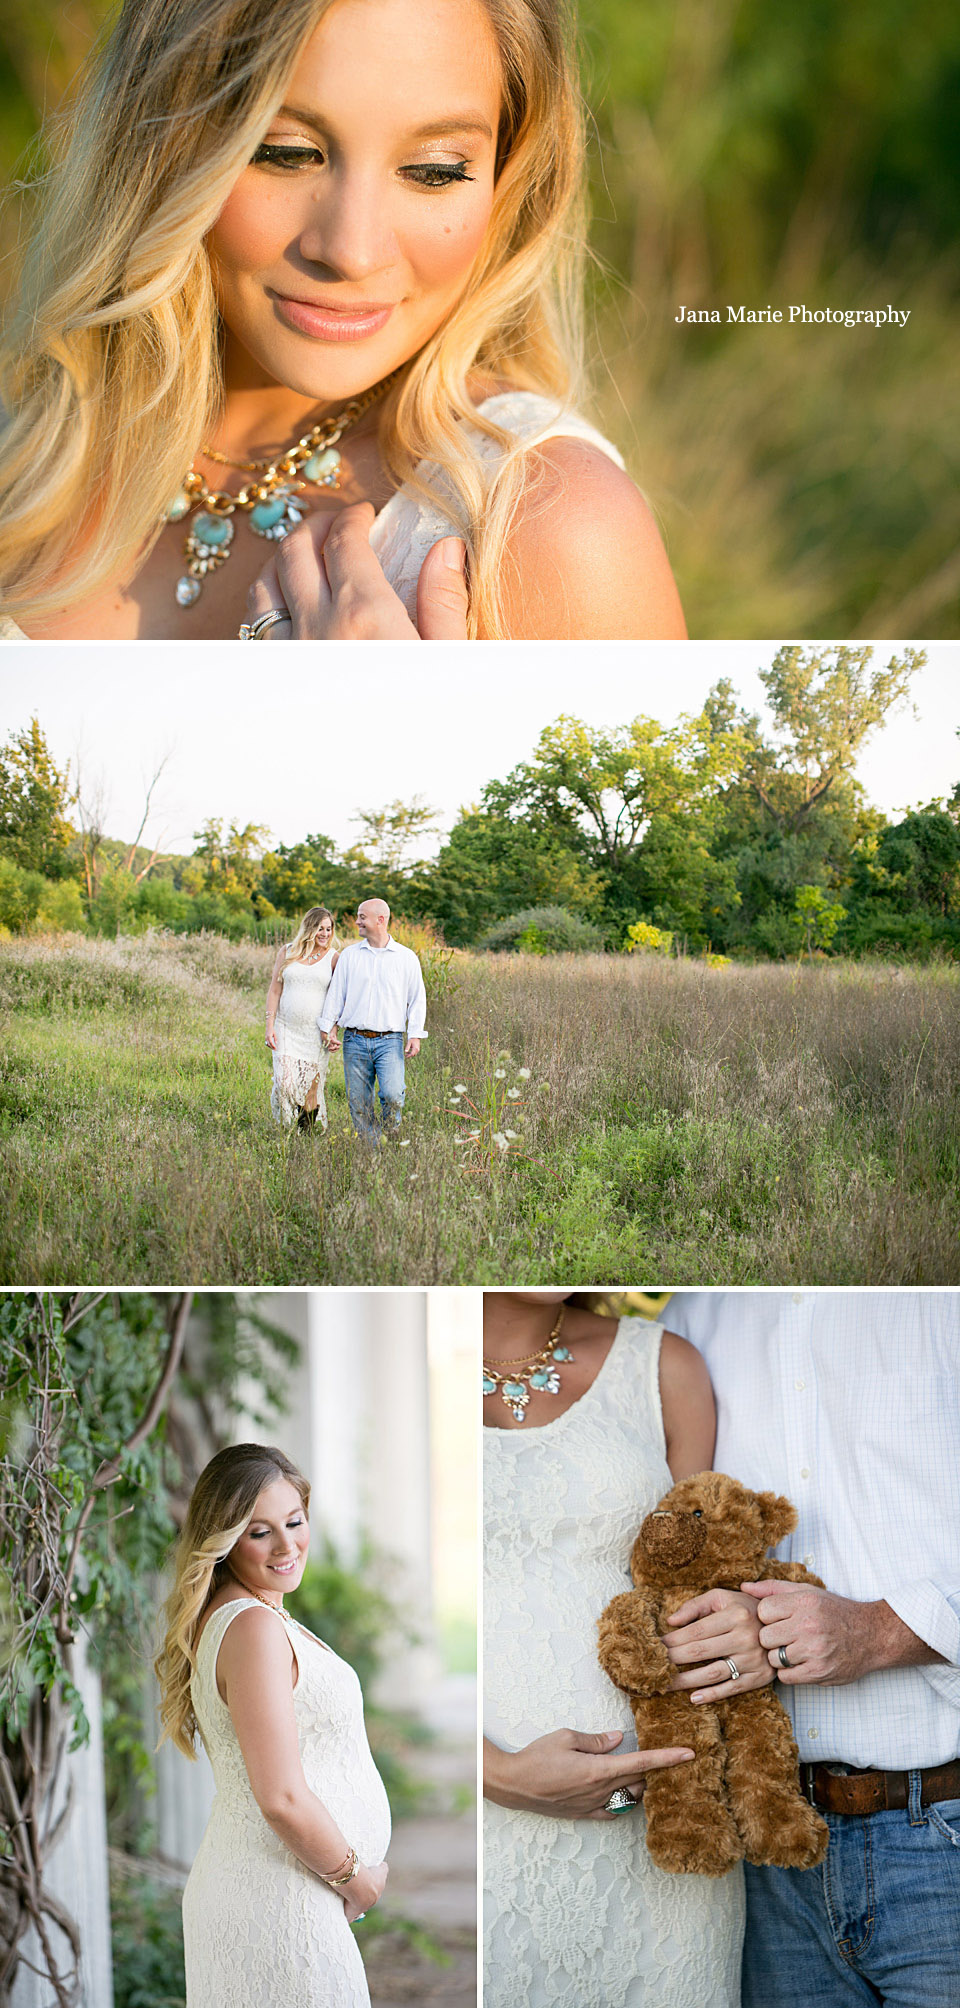 Belly portrait session, Beloved photos, Couple portraits, Marriage, Jana Marie Photography, Meadows, sunset